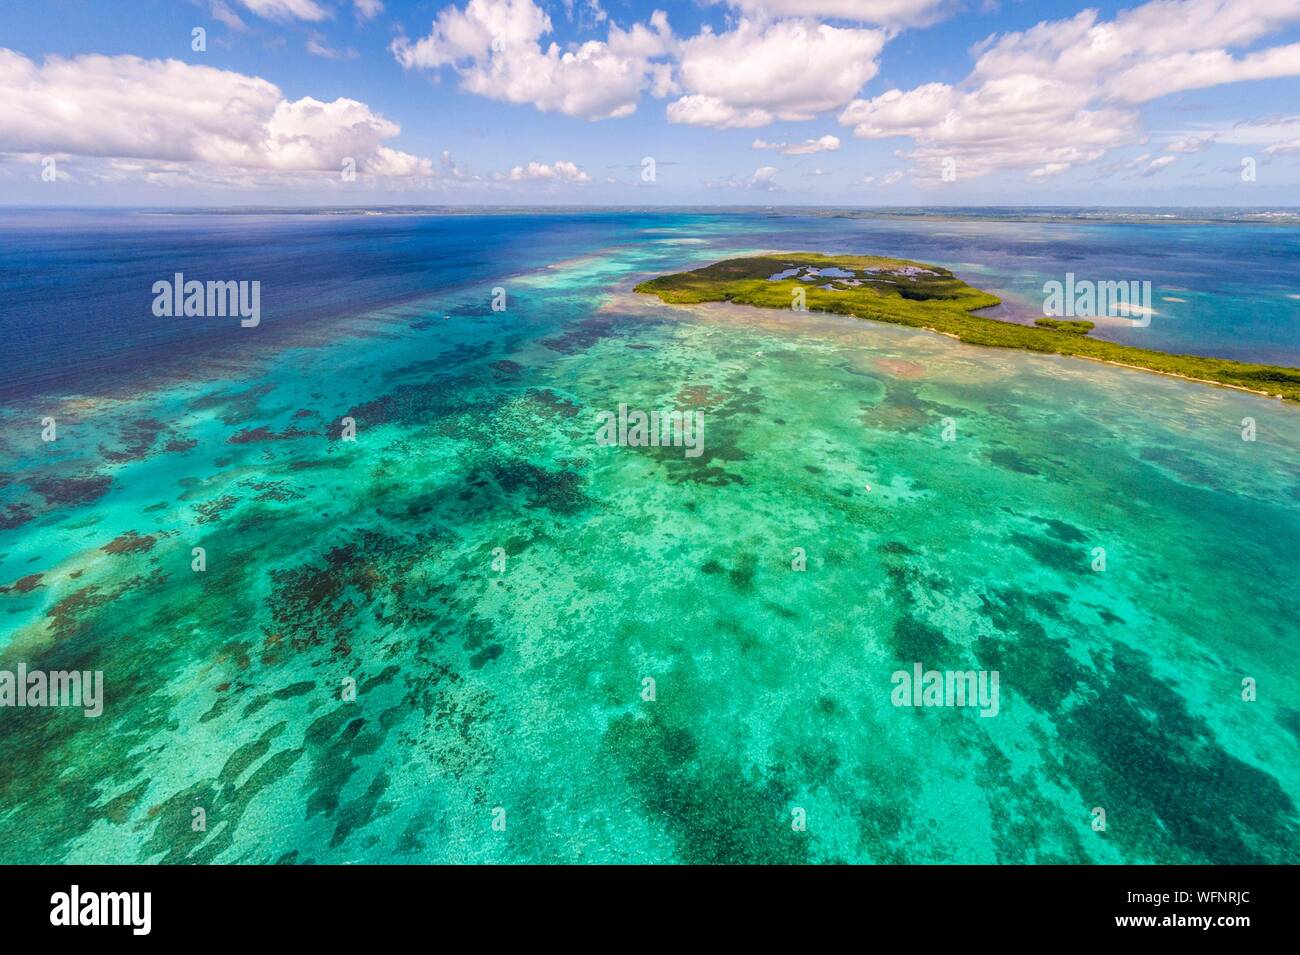 France, Caribbean, Lesser Antilles, Guadeloupe, Grand Cul-de-Sac Marin, heart of the Guadeloupe National Park, Basse-Terre, aerial view of the Fajou Islet and the longest coral reef (25 km) of the Lesser Antilles, Biosphere Reserve of the Archipelago of Guadeloupe Stock Photo